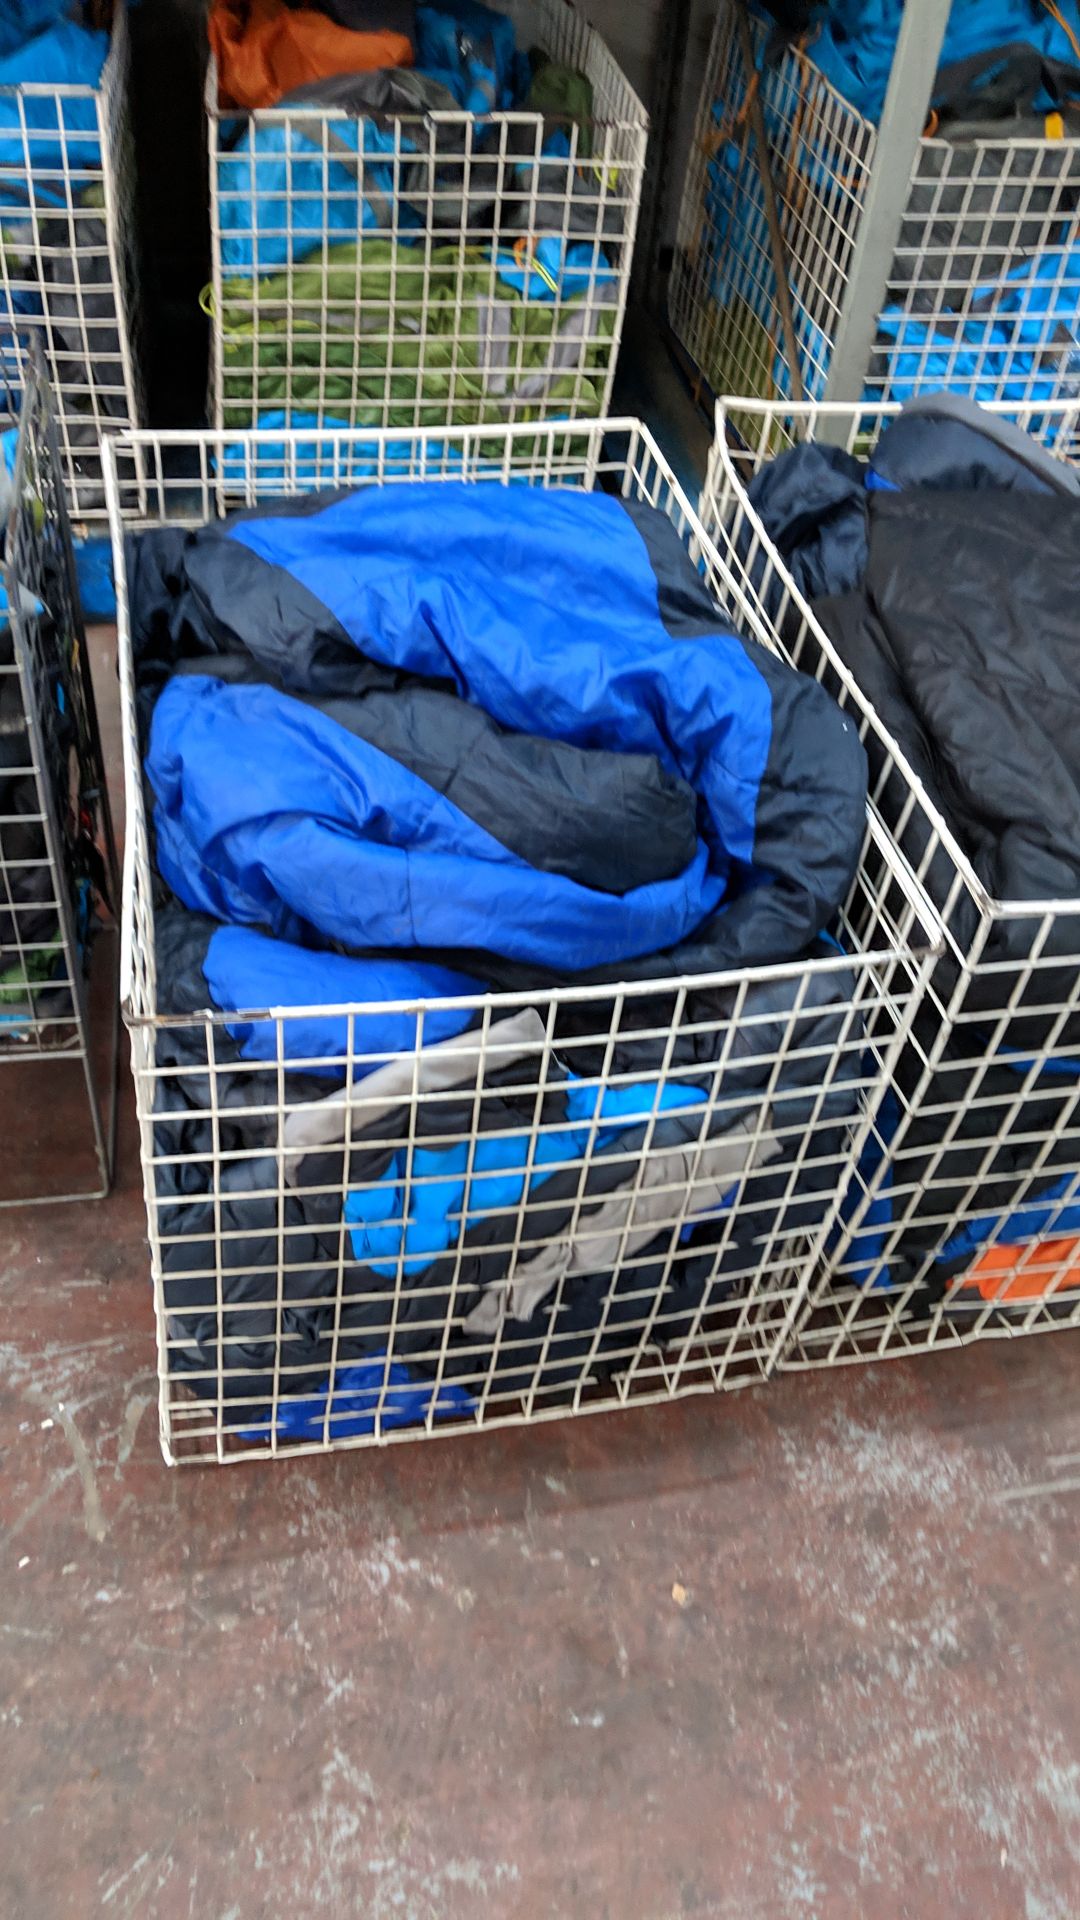 Contents of 2 cages of sleeping bags plus 1 smaller cage of bags for putting sleeping bags in - - Image 5 of 8